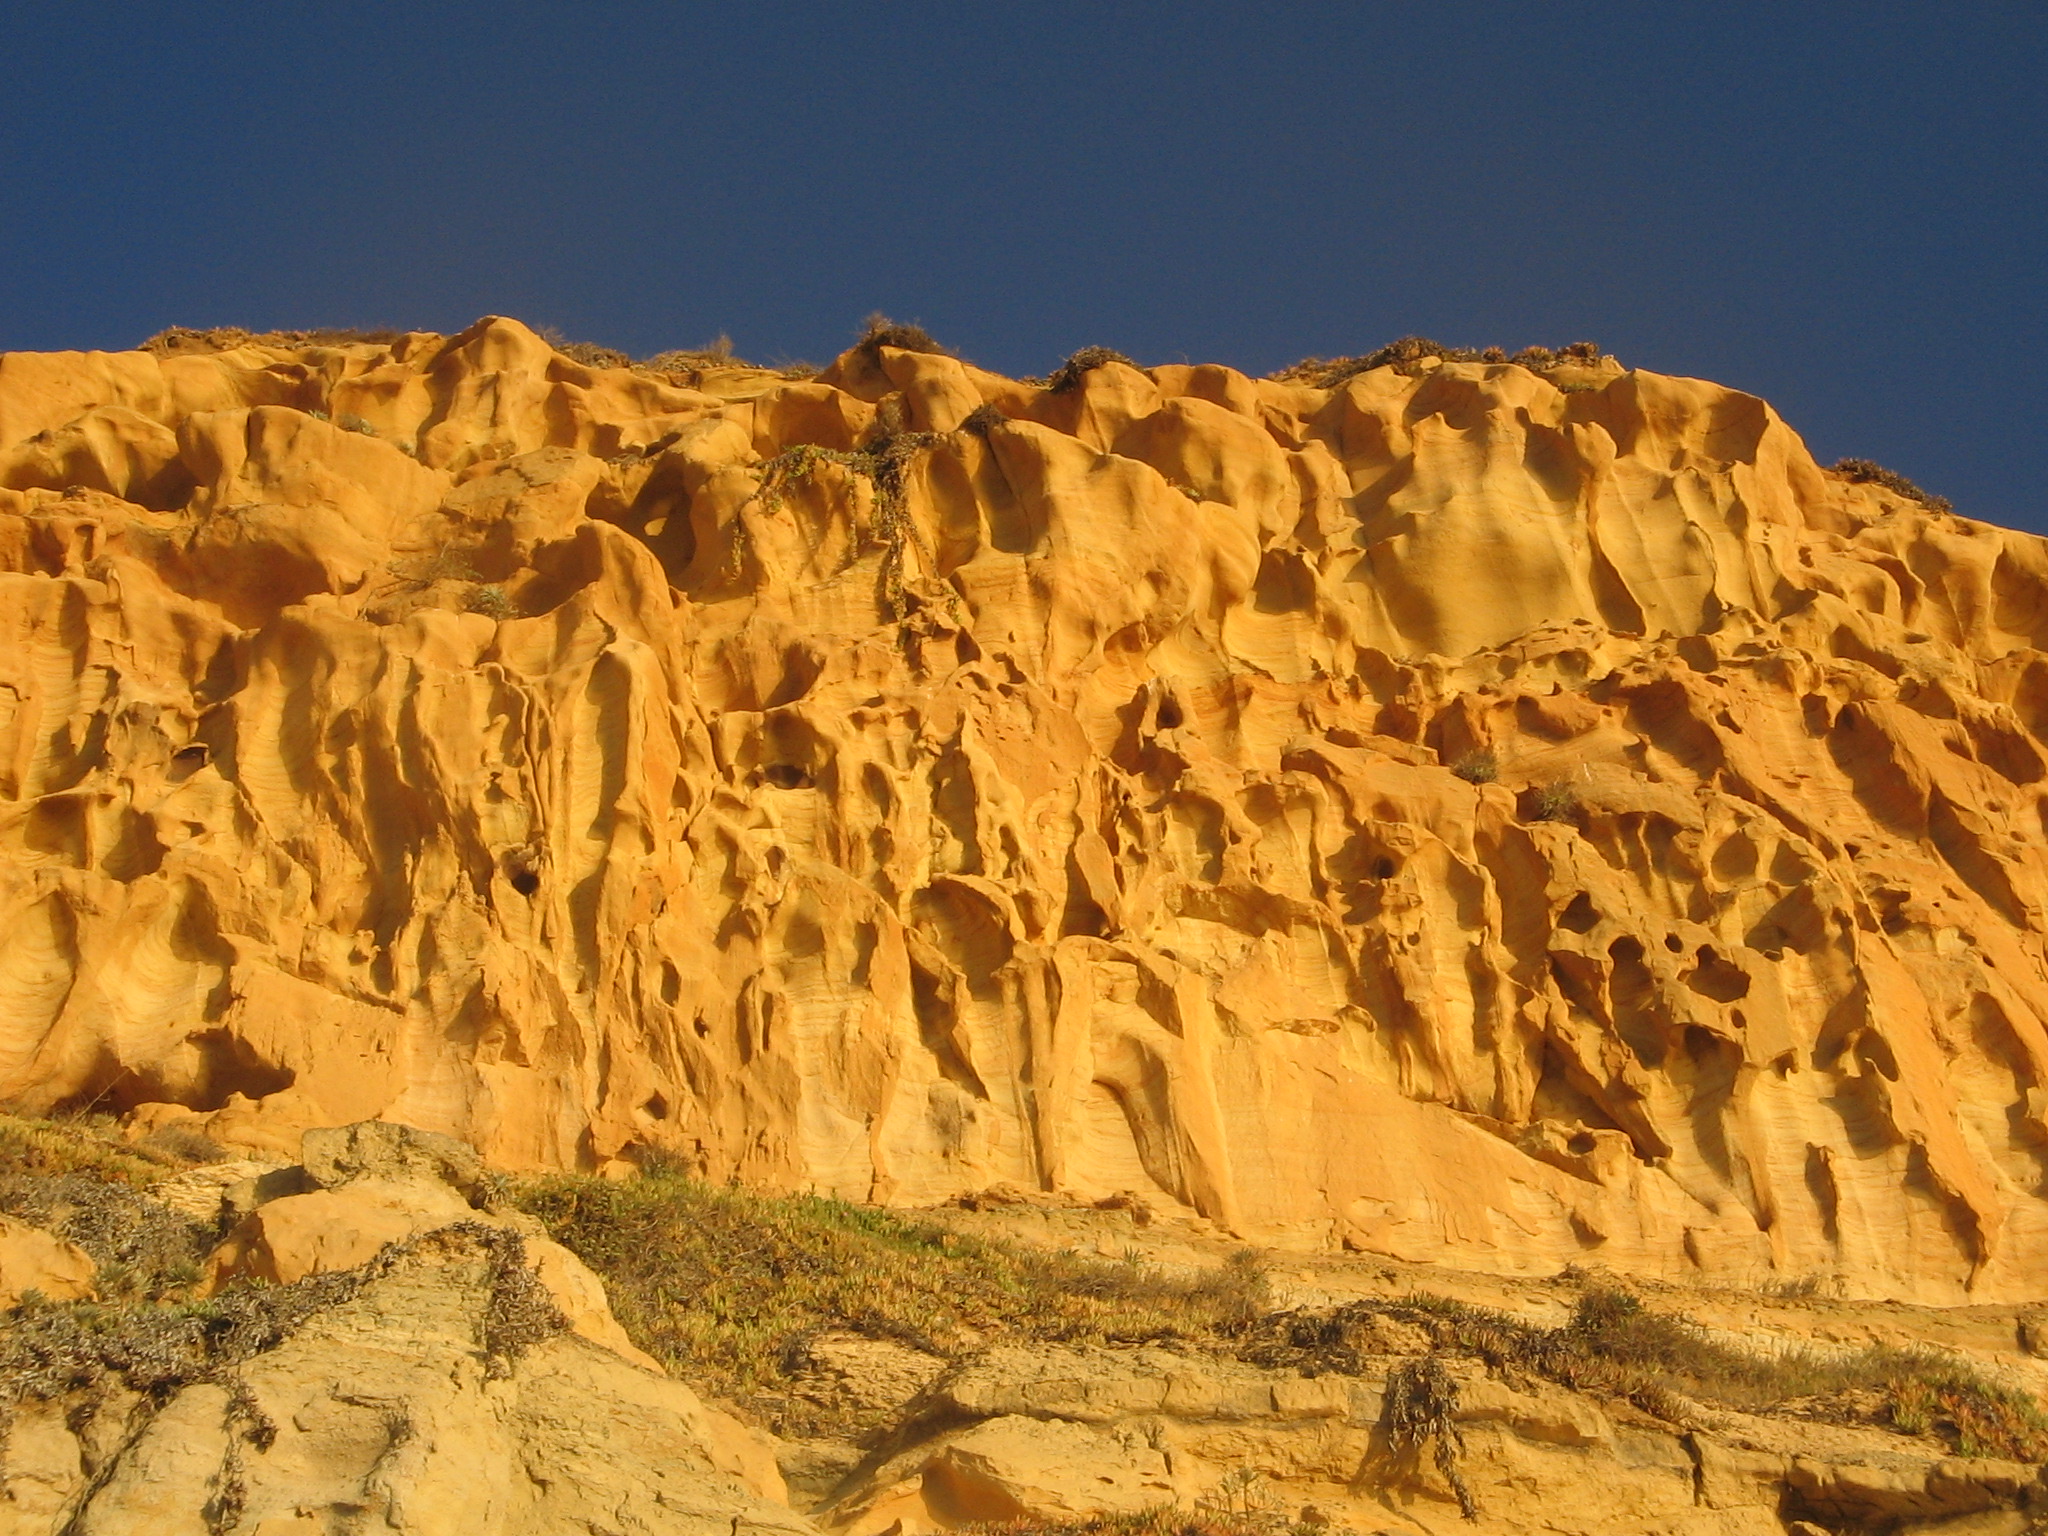 Sandstone cliff formation near a beach in San Diego showing evidence of physical weathering.